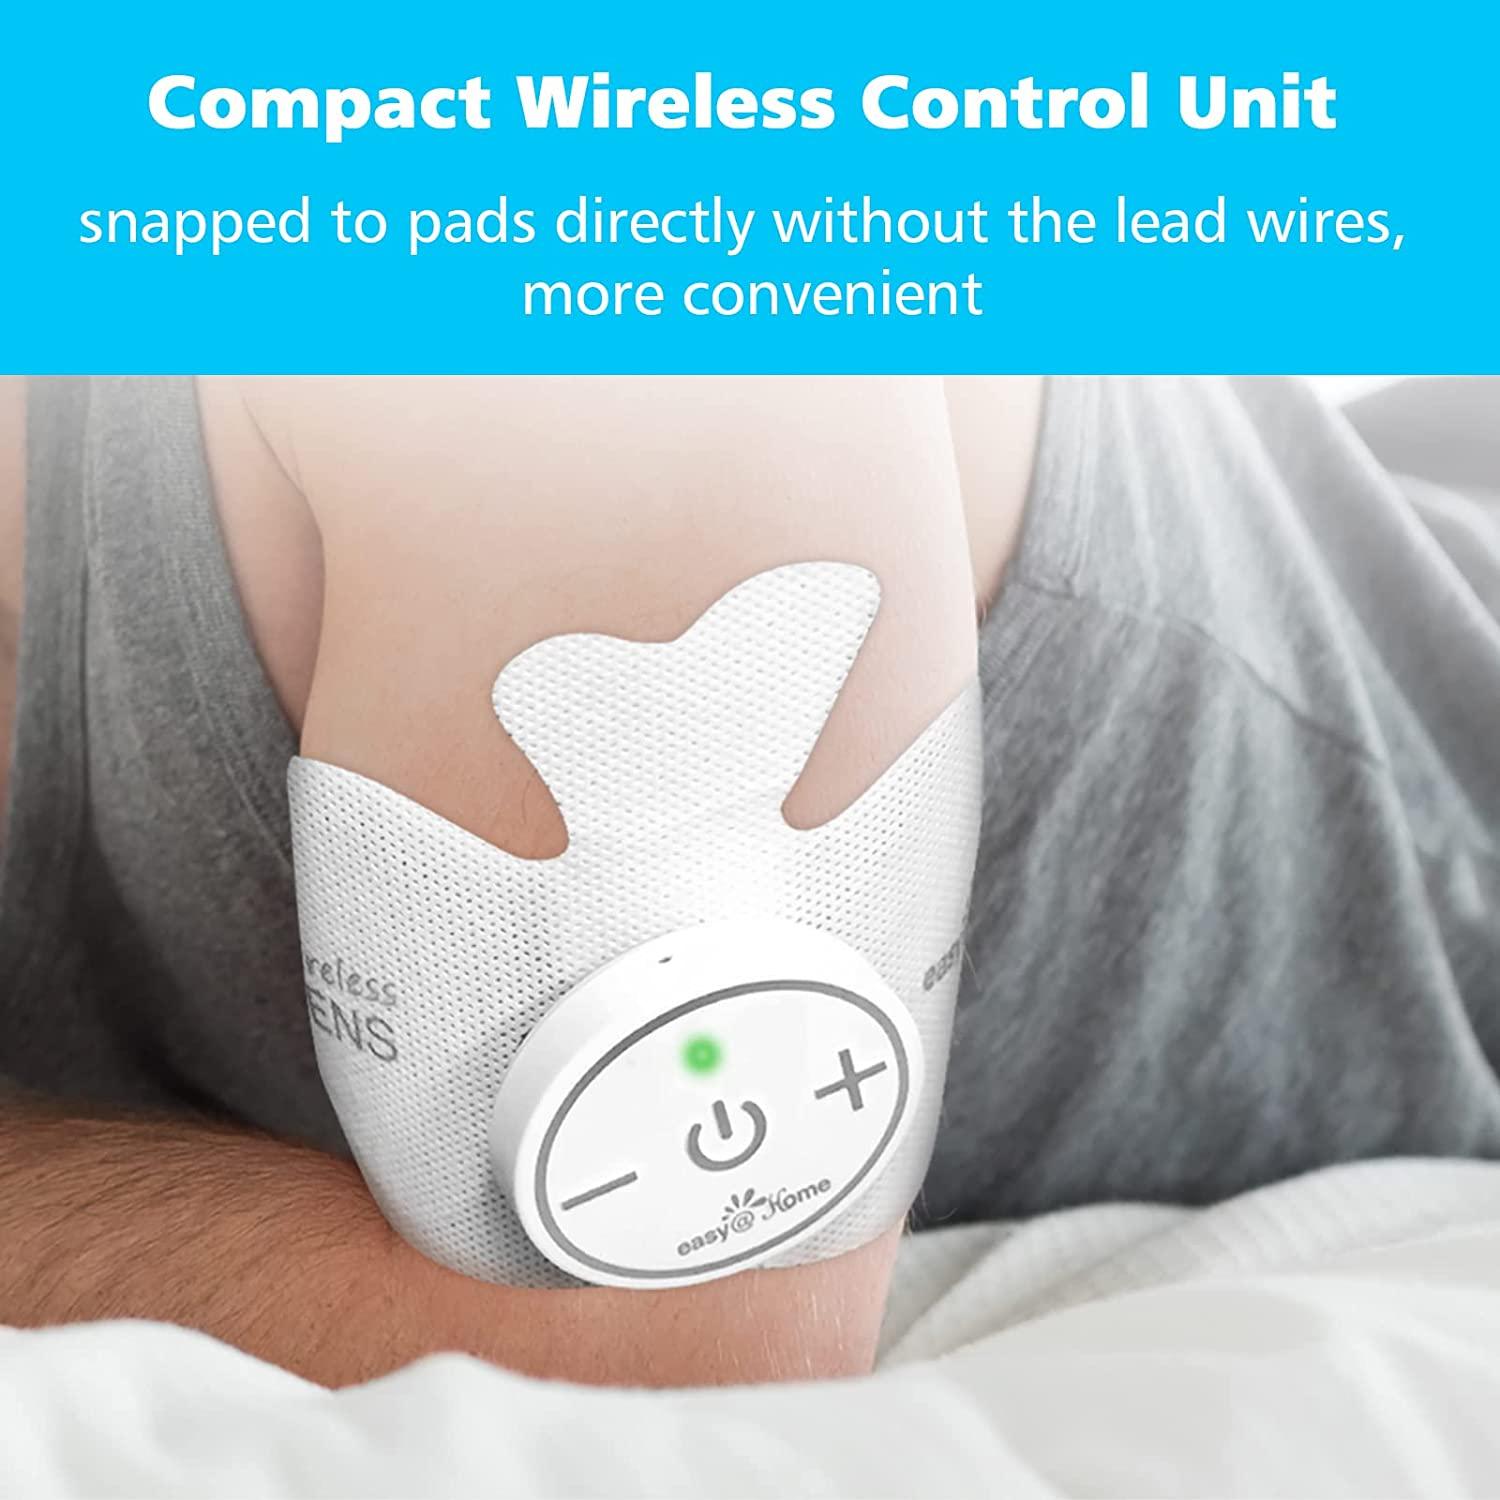 Easy@Home Rechargeable Compact Wireless TENS Unit - 510K Cleared, FSA  Eligible Electric EMS Muscle Stimulator Pain Relief Therapy, Portable Pain